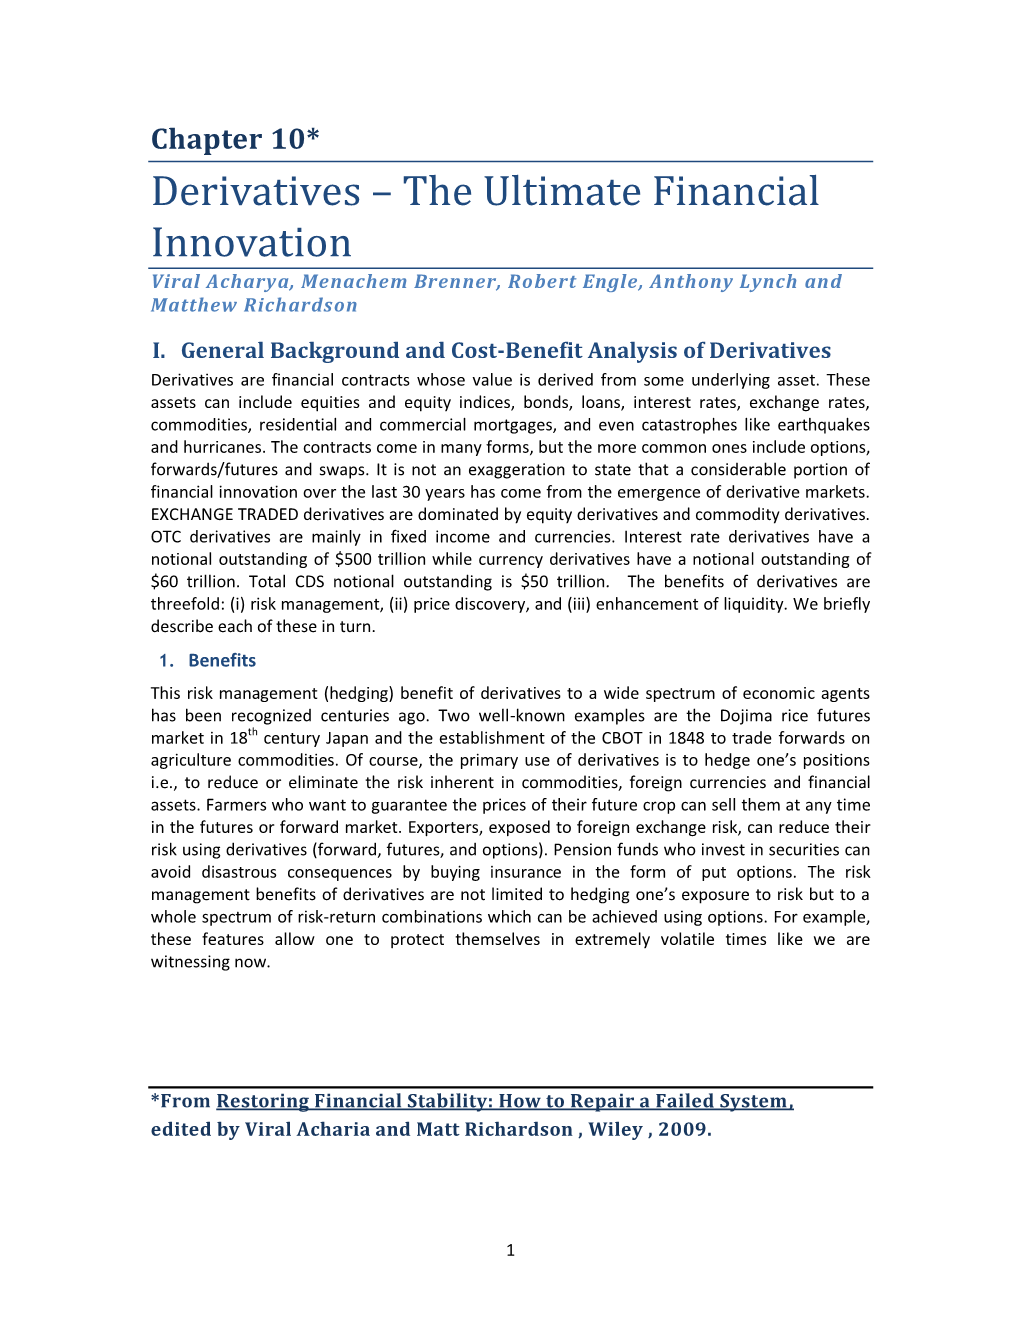 Derivatives: the Ultimate Financial Innovation